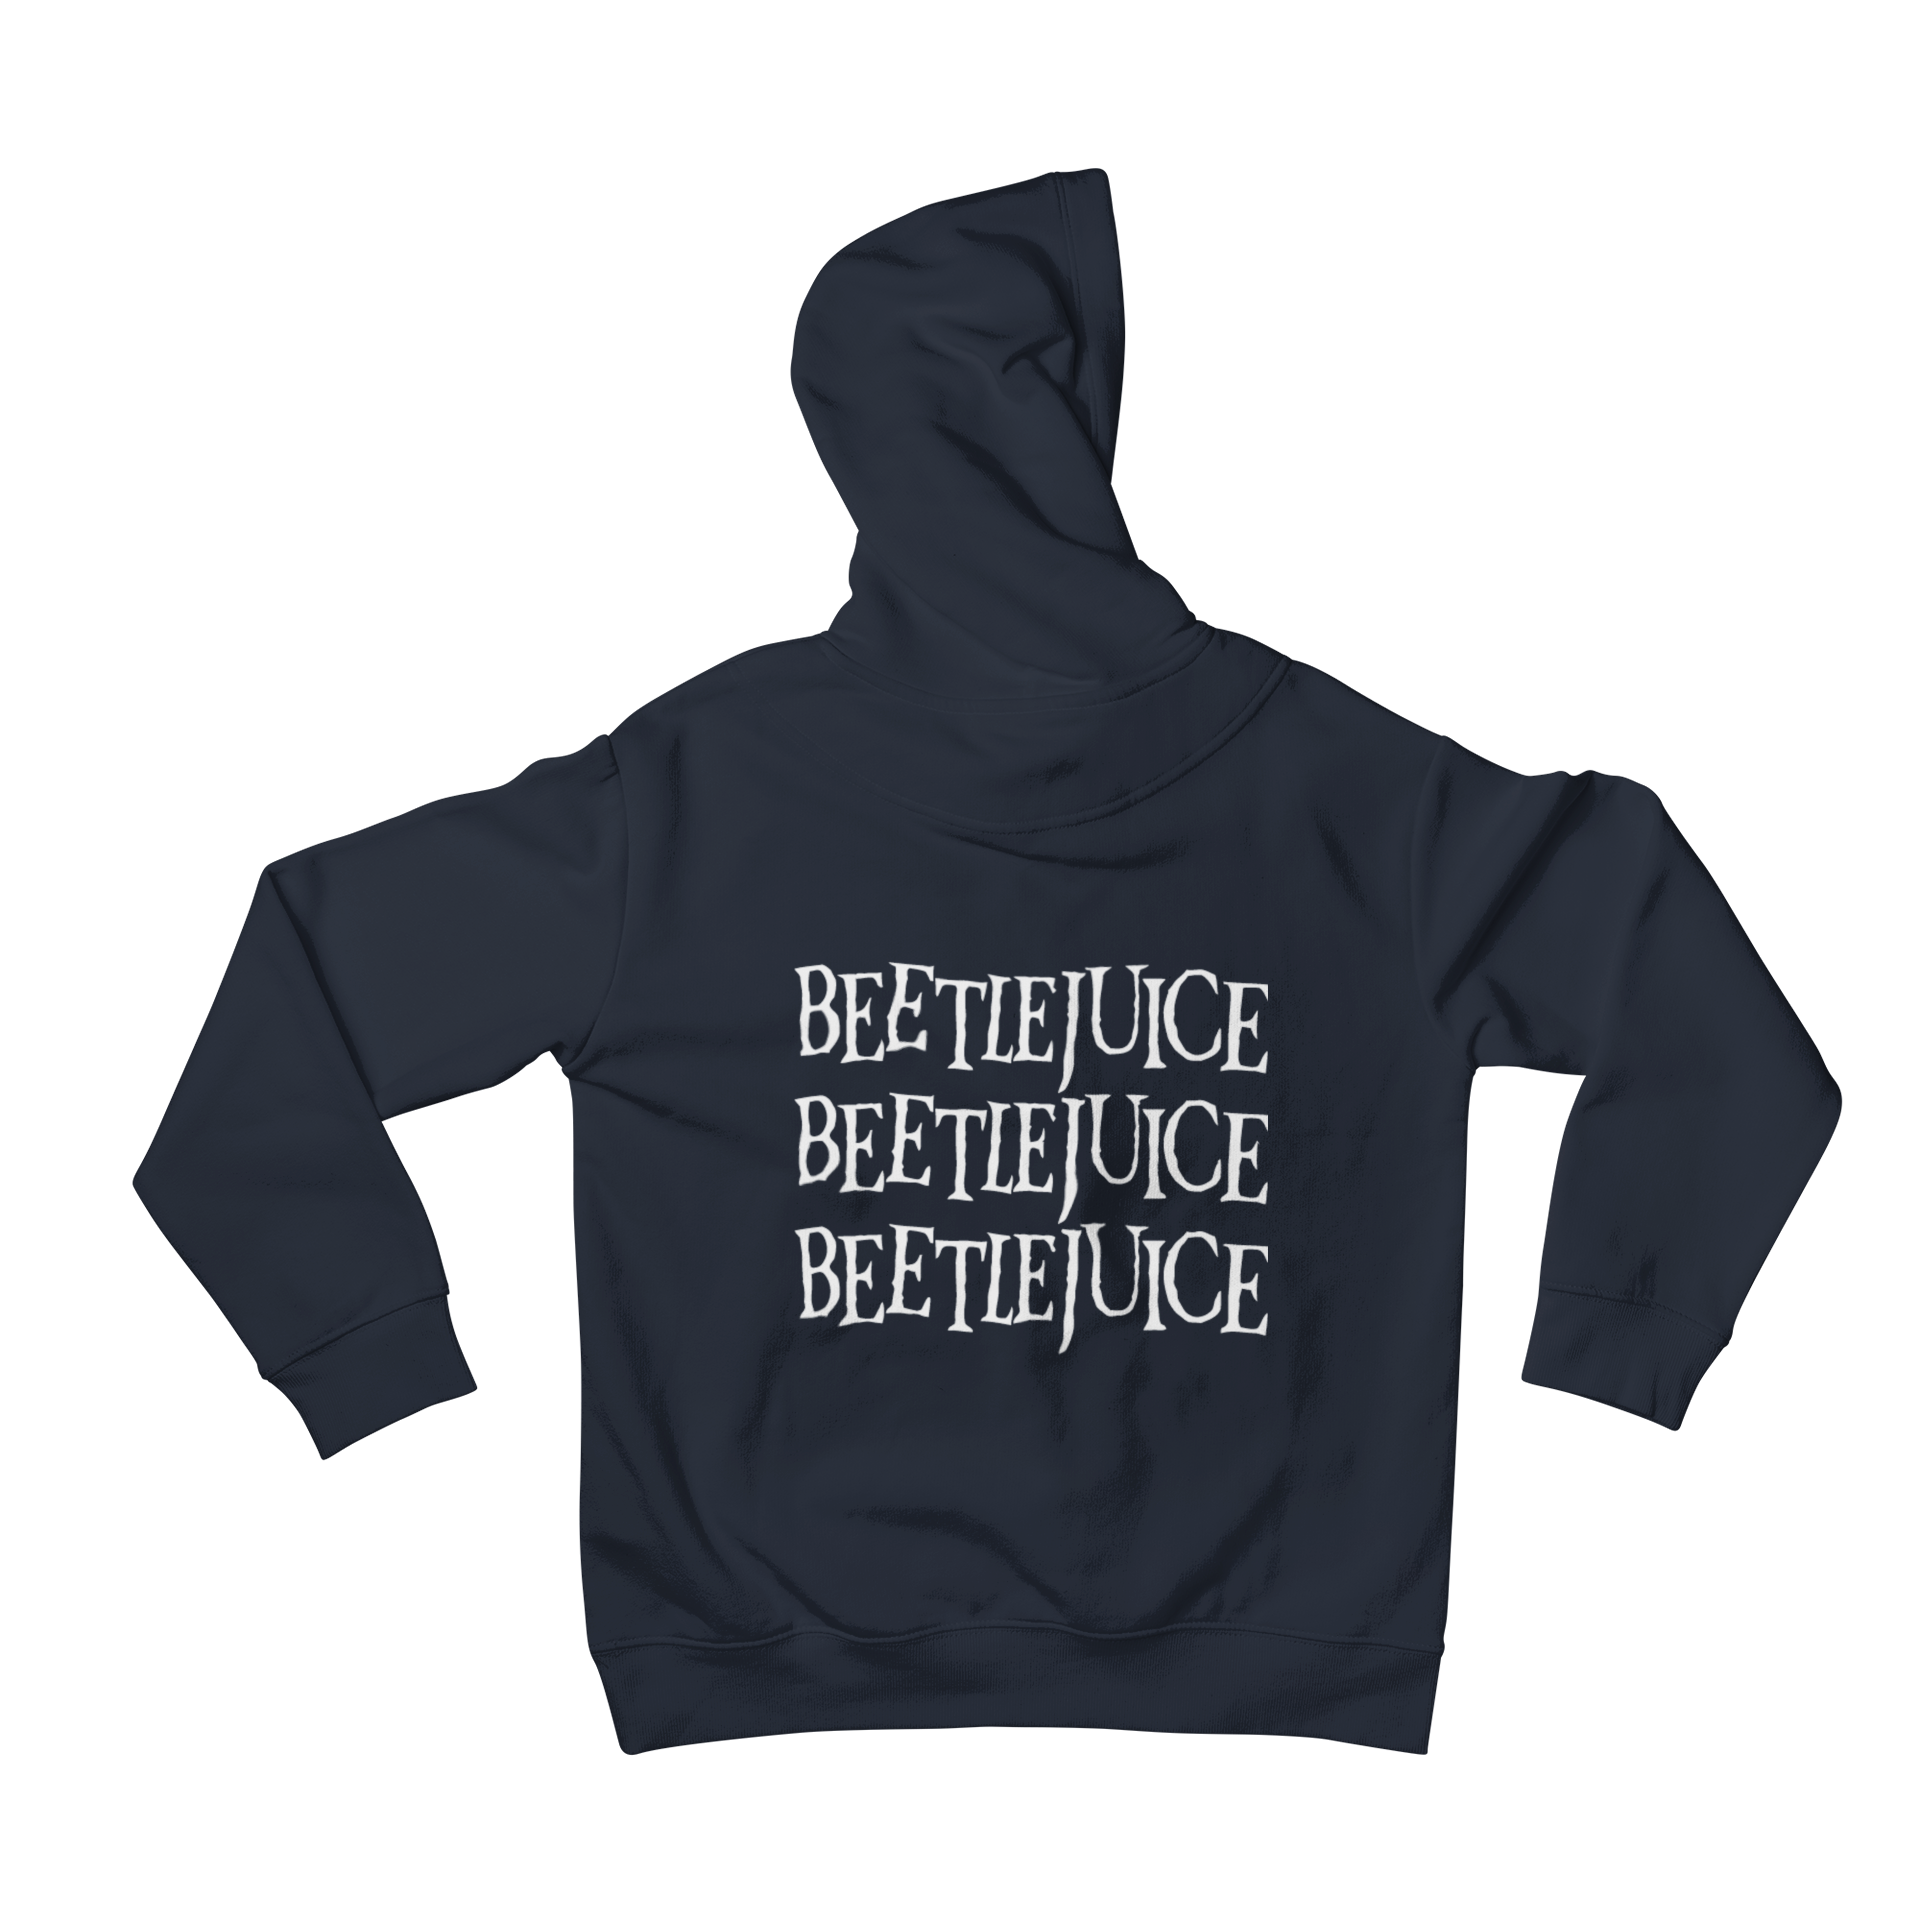 If you are a fan of Beetlejuice, you will love Teevolution's warm back print slogan hoodie. This hoodie is inspired by the comedy/horror movie and features the famous words "Beetlejuice, Beetlejuice, Beetlejuice" on the back. Stay warm and show off your love for the movie with this must-have hoodie.